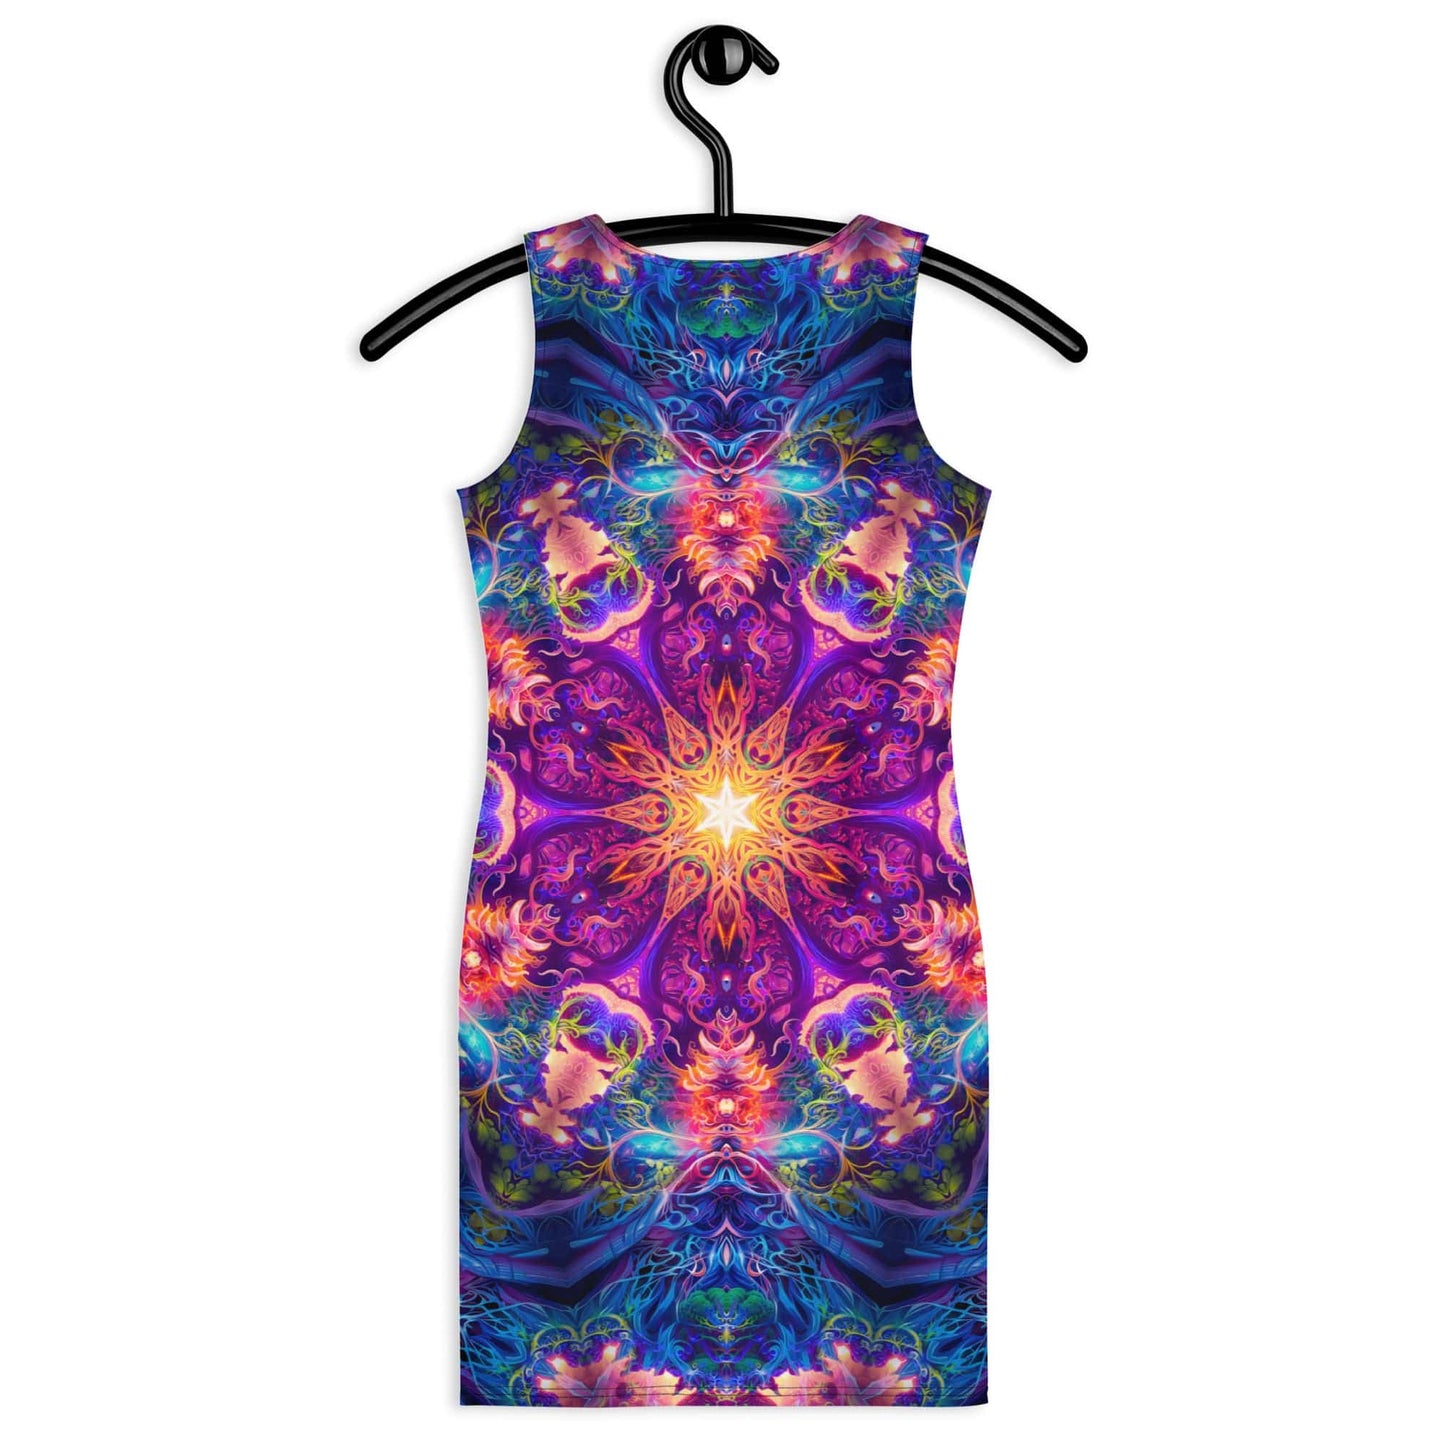 "The Sacred Circle" Bodycon FITTED DRESS